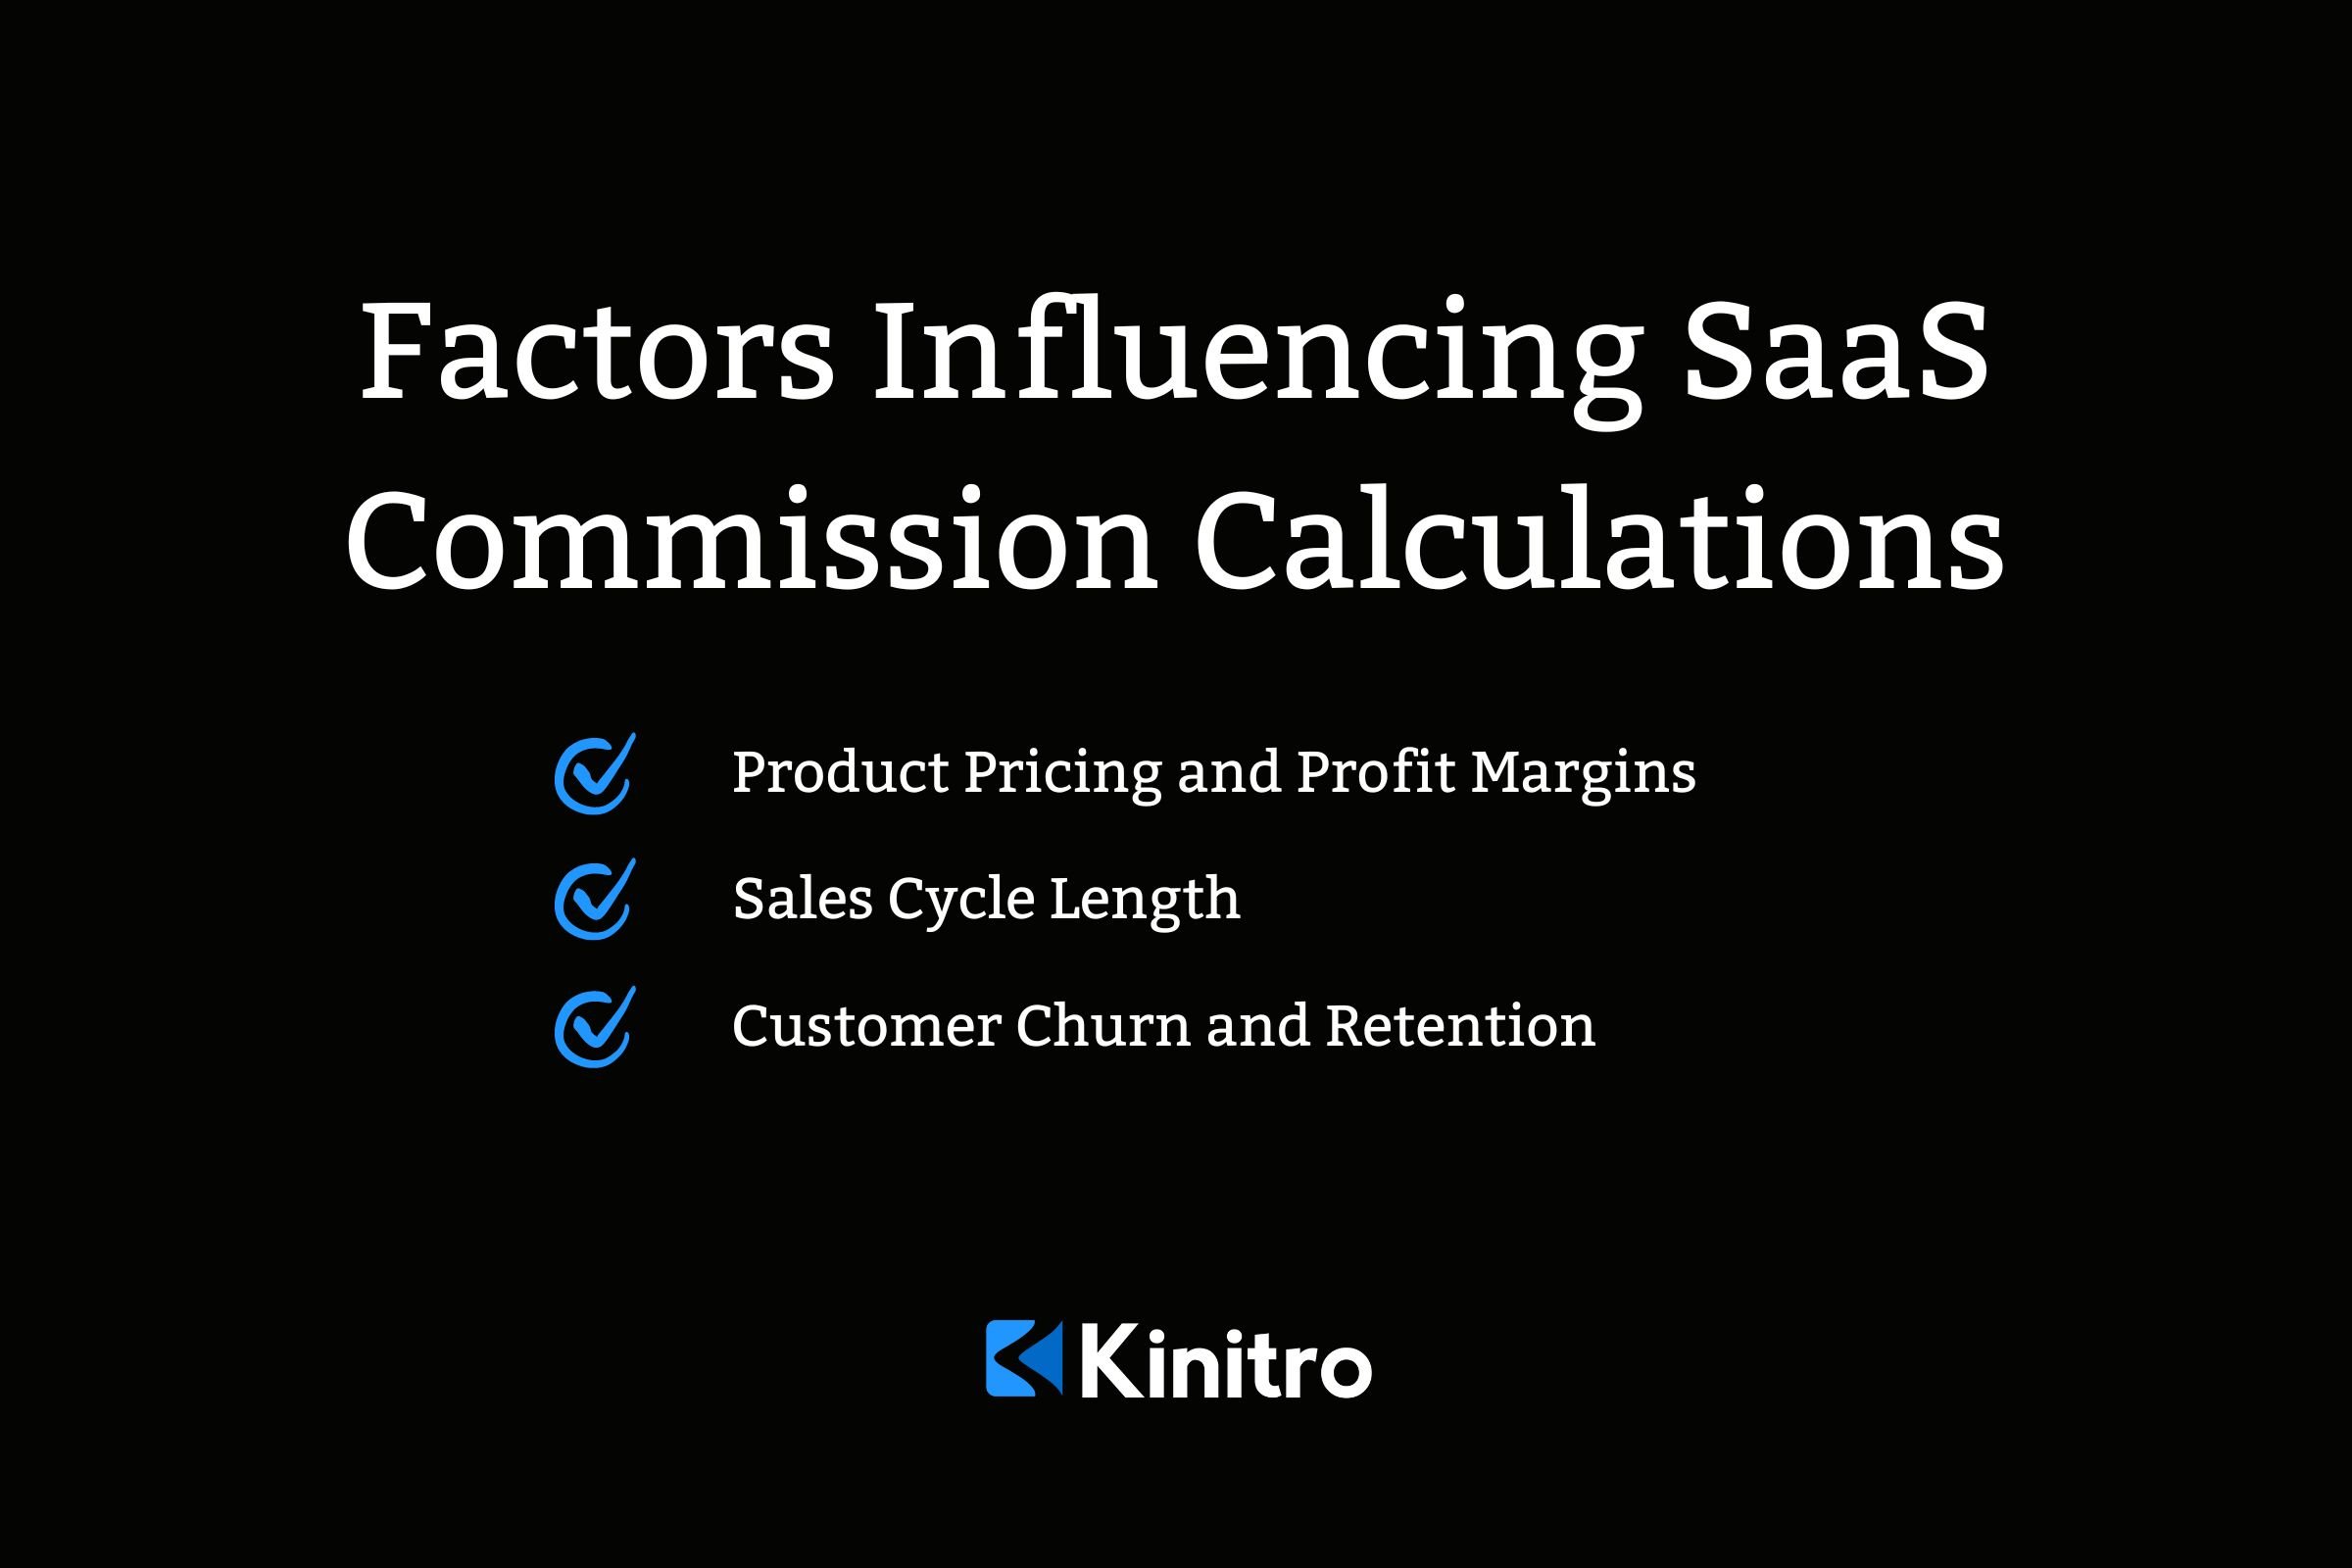 Factors Influencing SaaS Commission Calculations